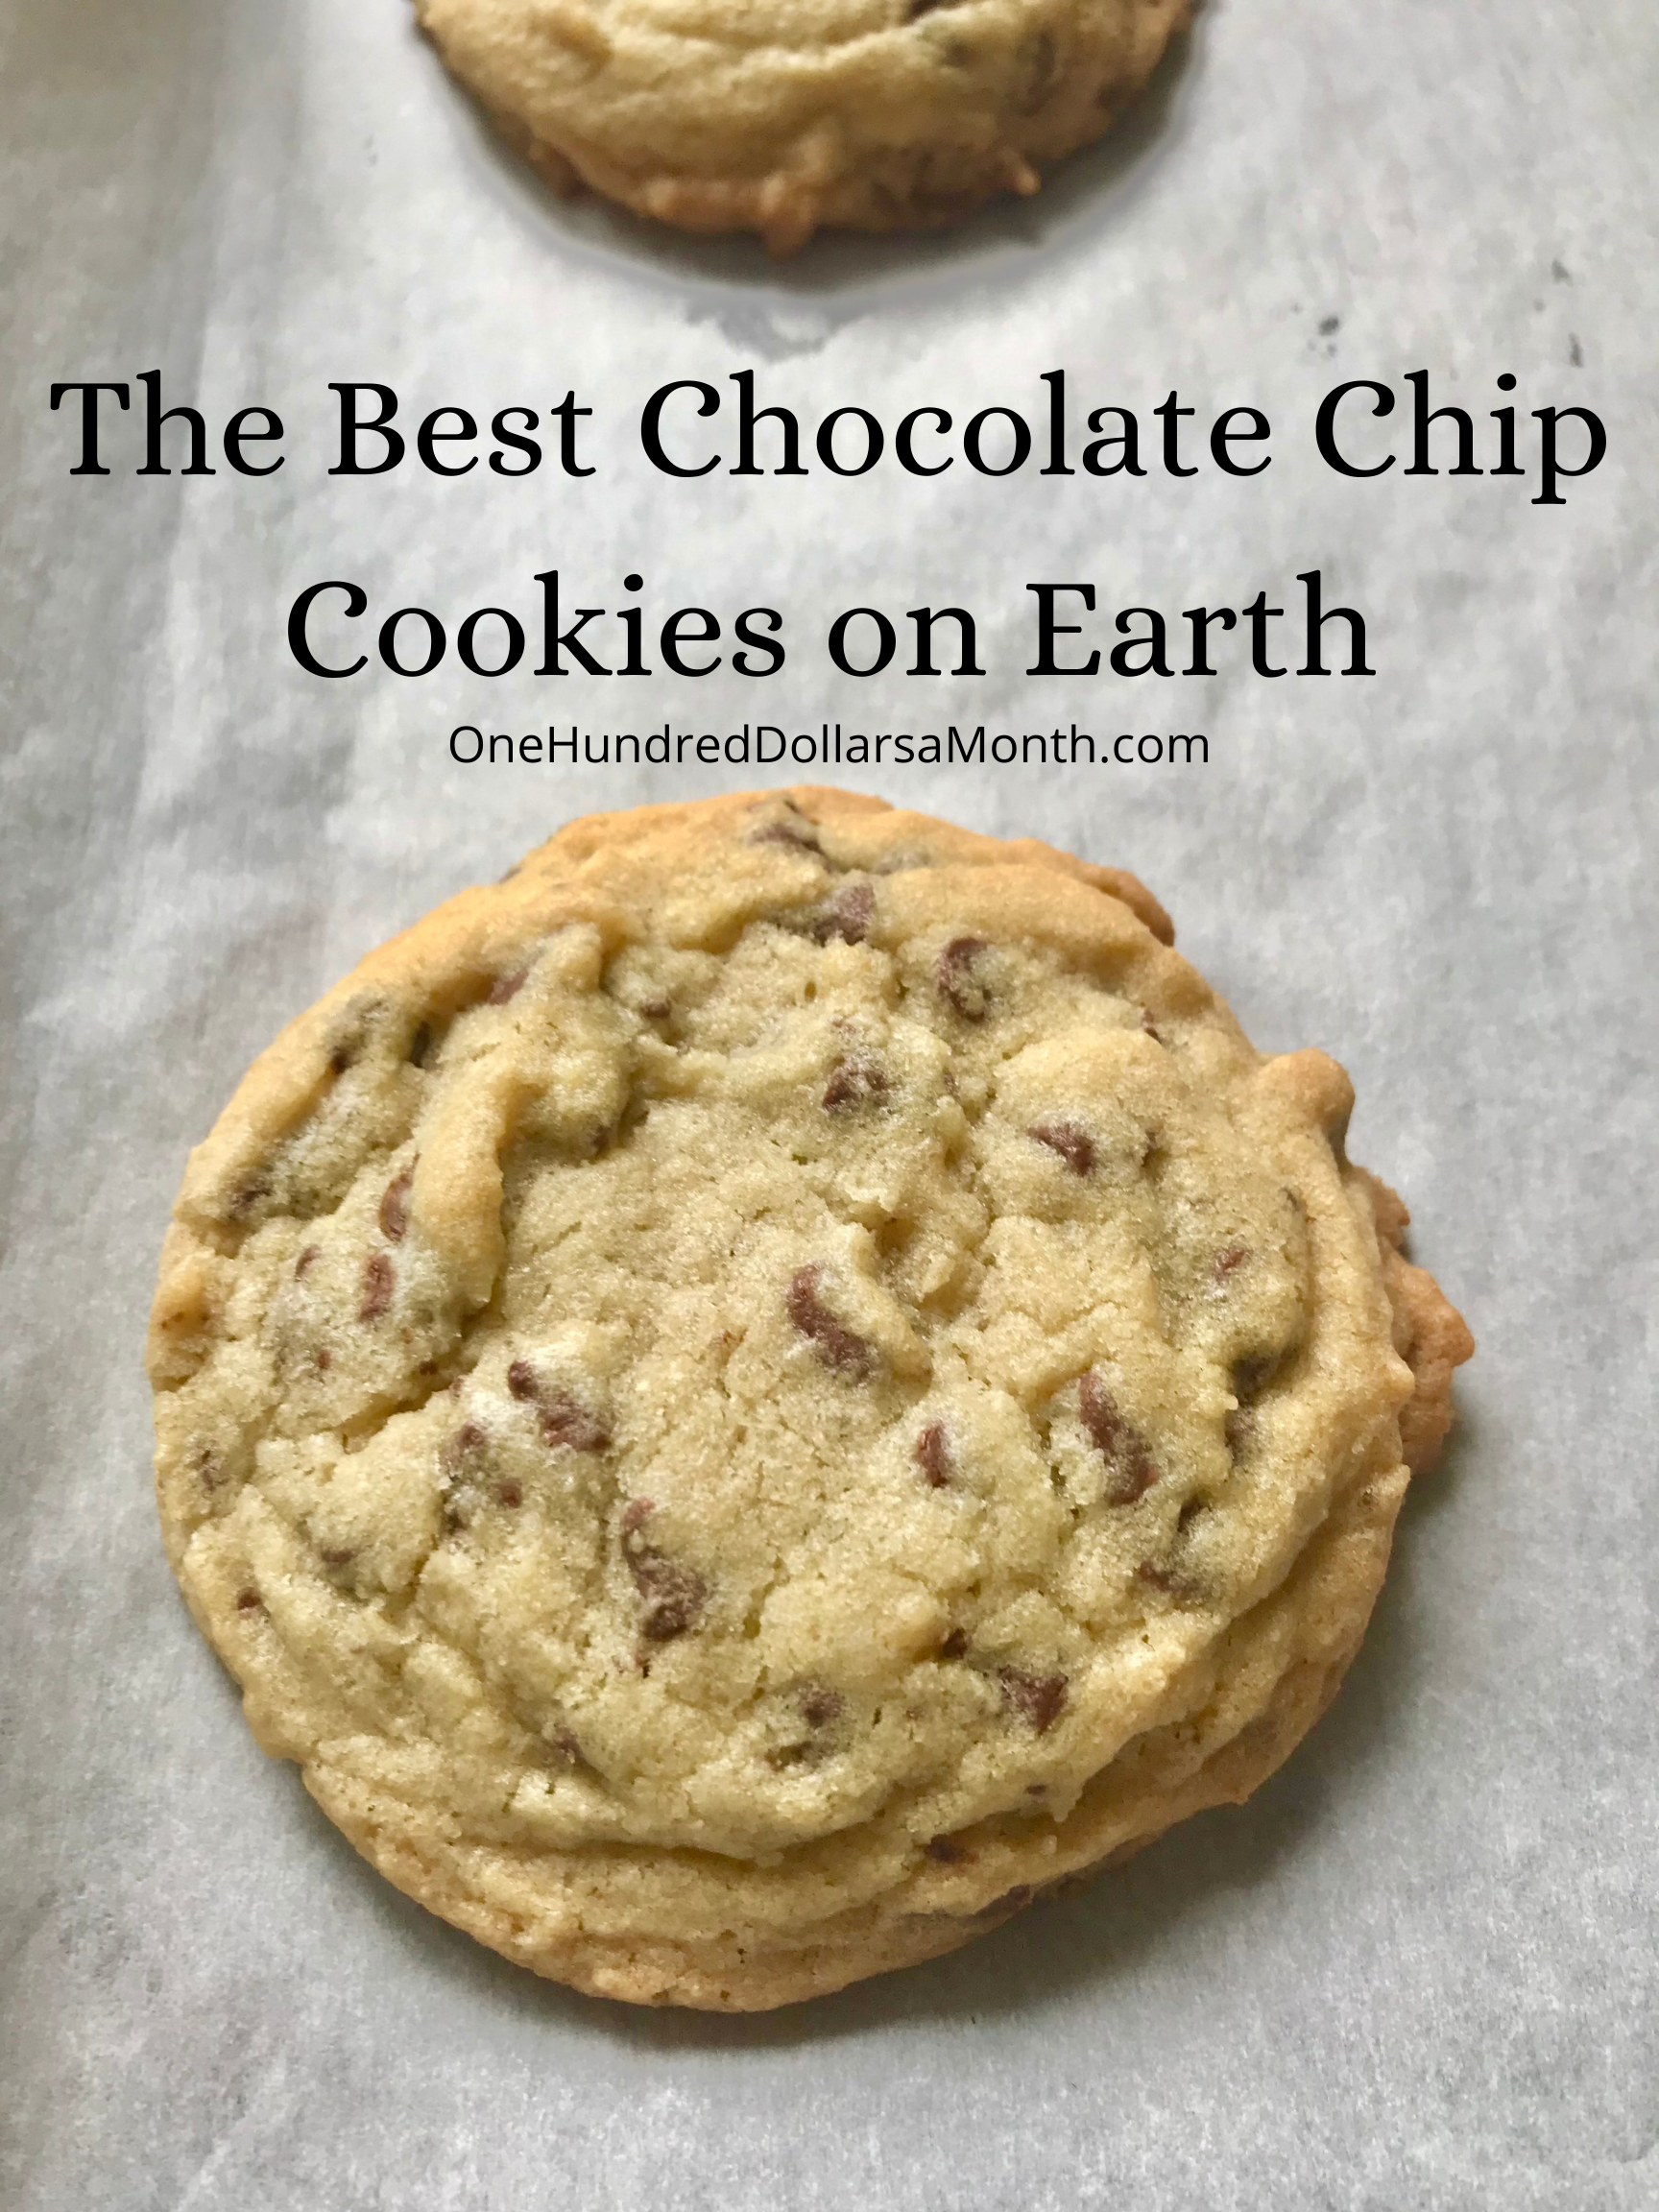 The Best Chocolate Chip Cookies on Earth